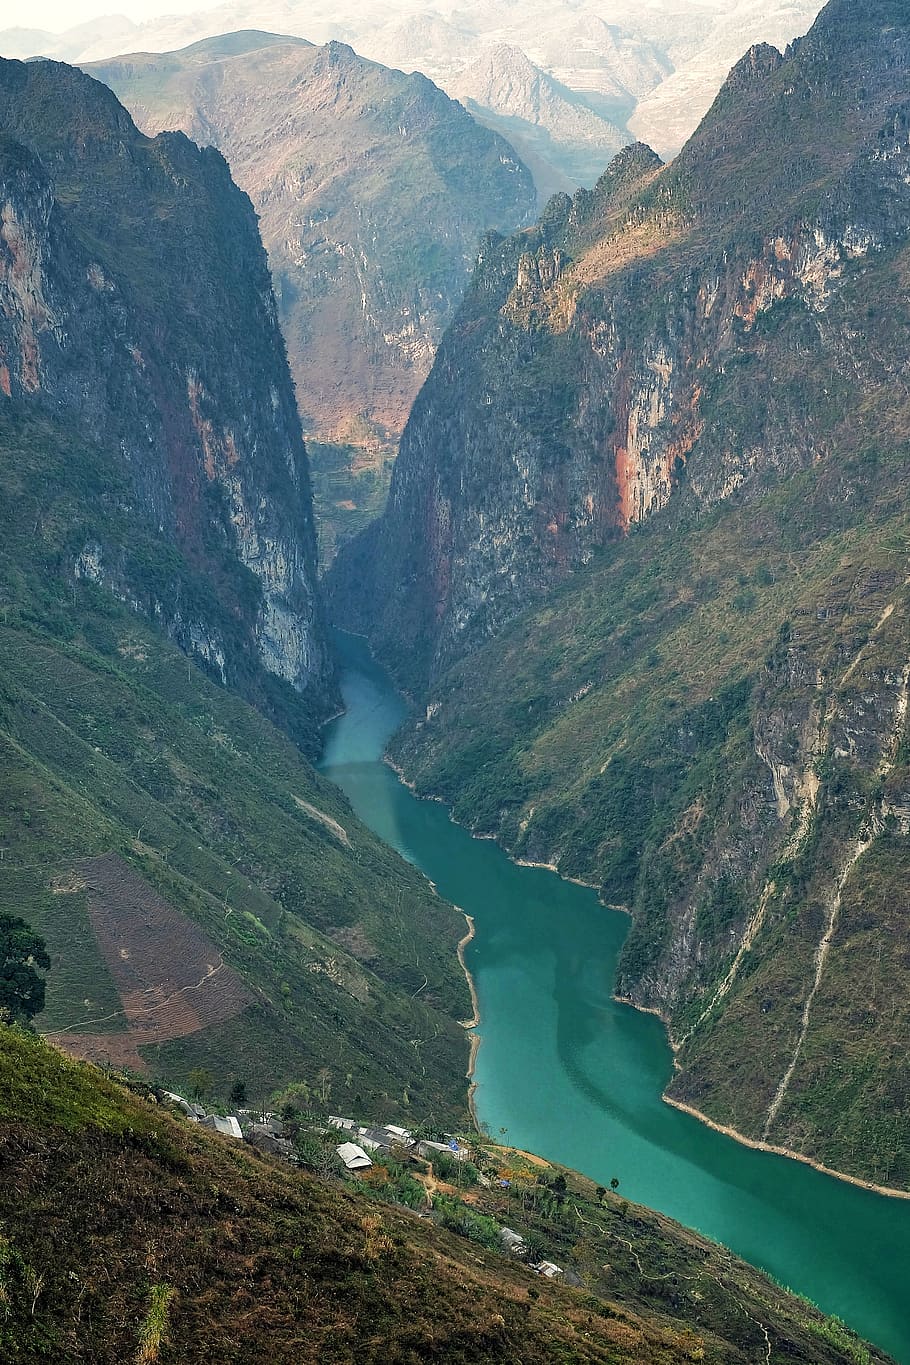 ha giang, vienam, nho que river, lanscapes, photography, fujifilm, travel, moutains, river, discovery